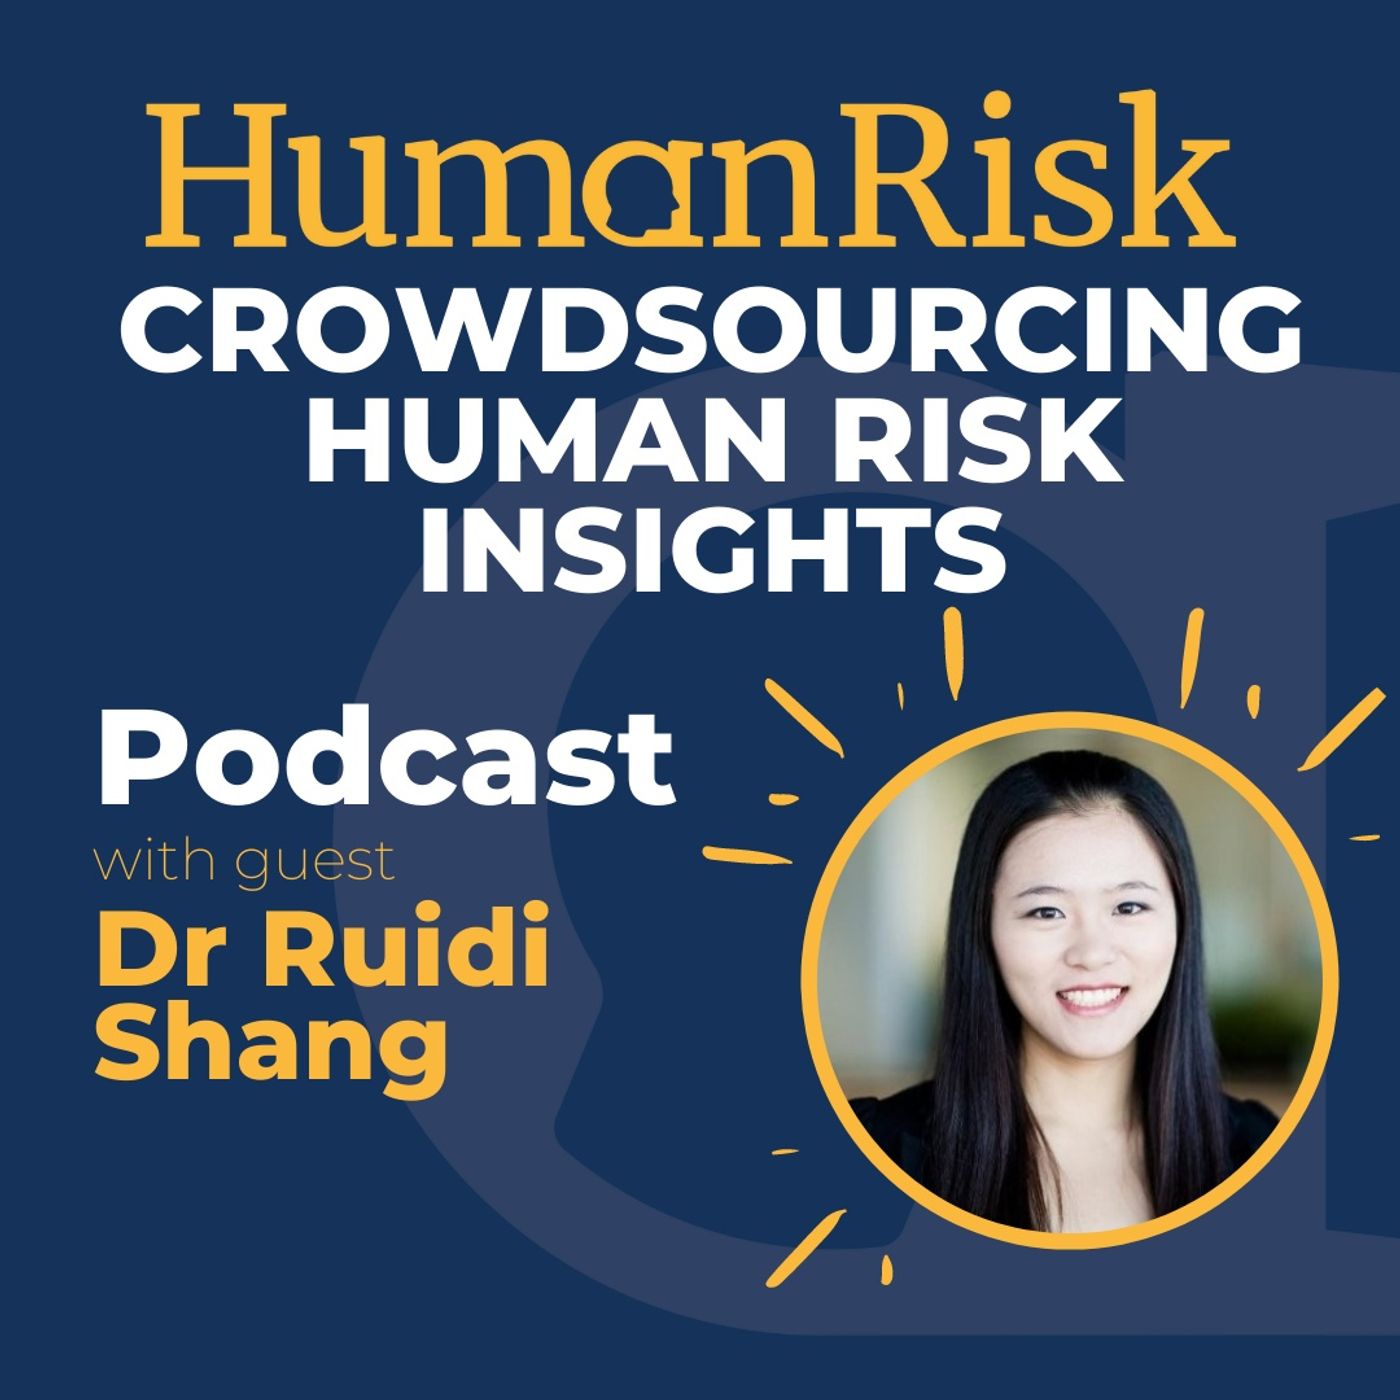 Dr Ruidi Shang on Crowdsourcing Human Risk Insights